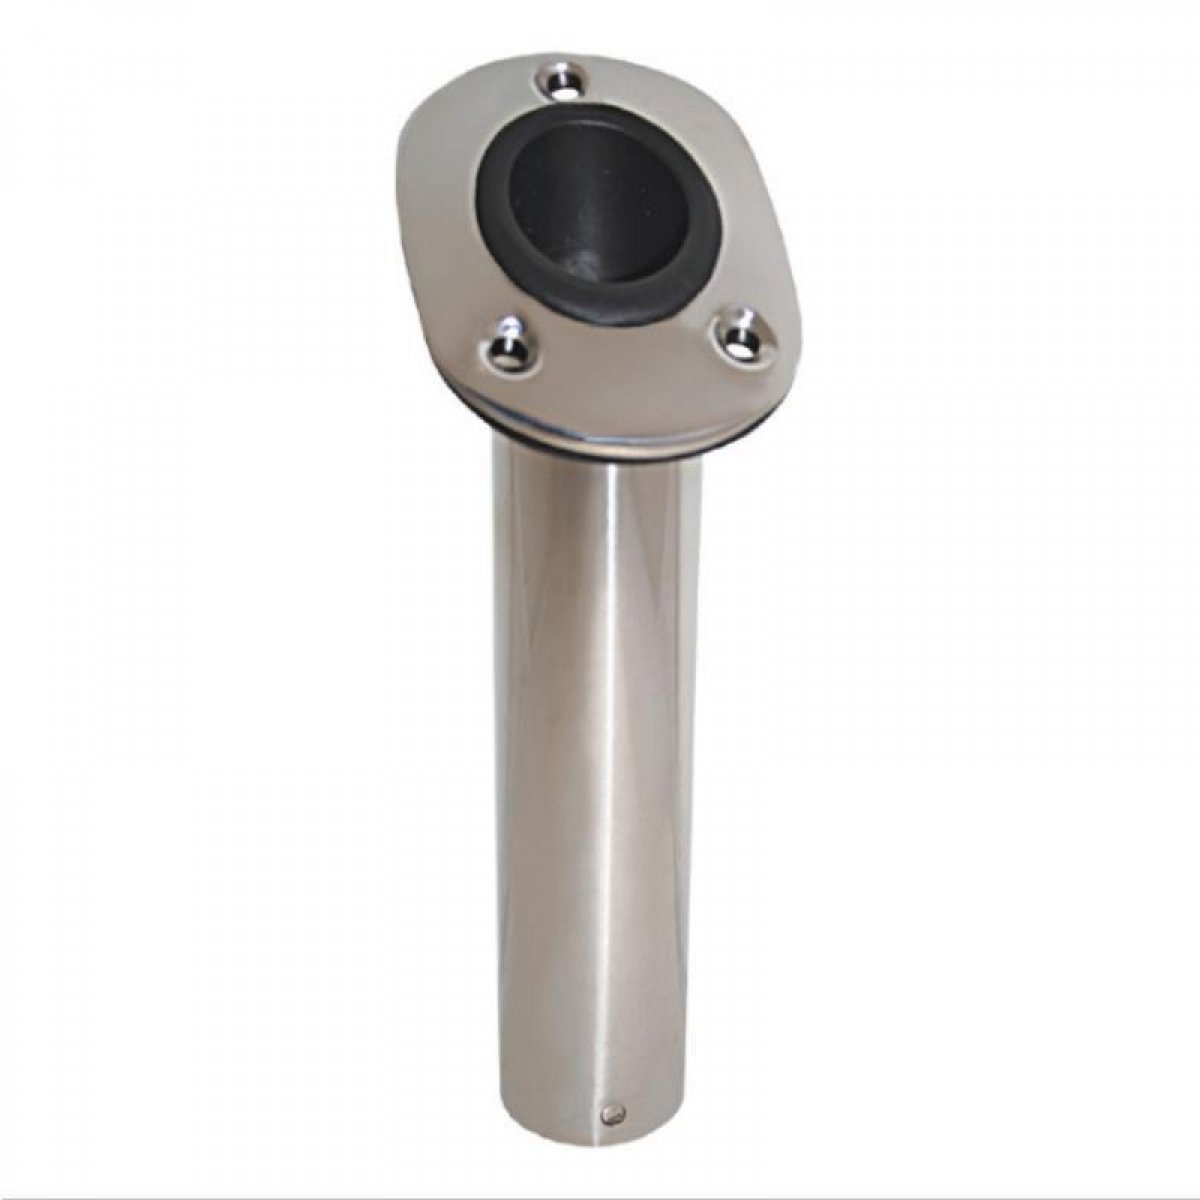 STAINLESS FLUSH MOUNT ROD HOLDERS = SPECIAL PRICE $ 24.00 EACH